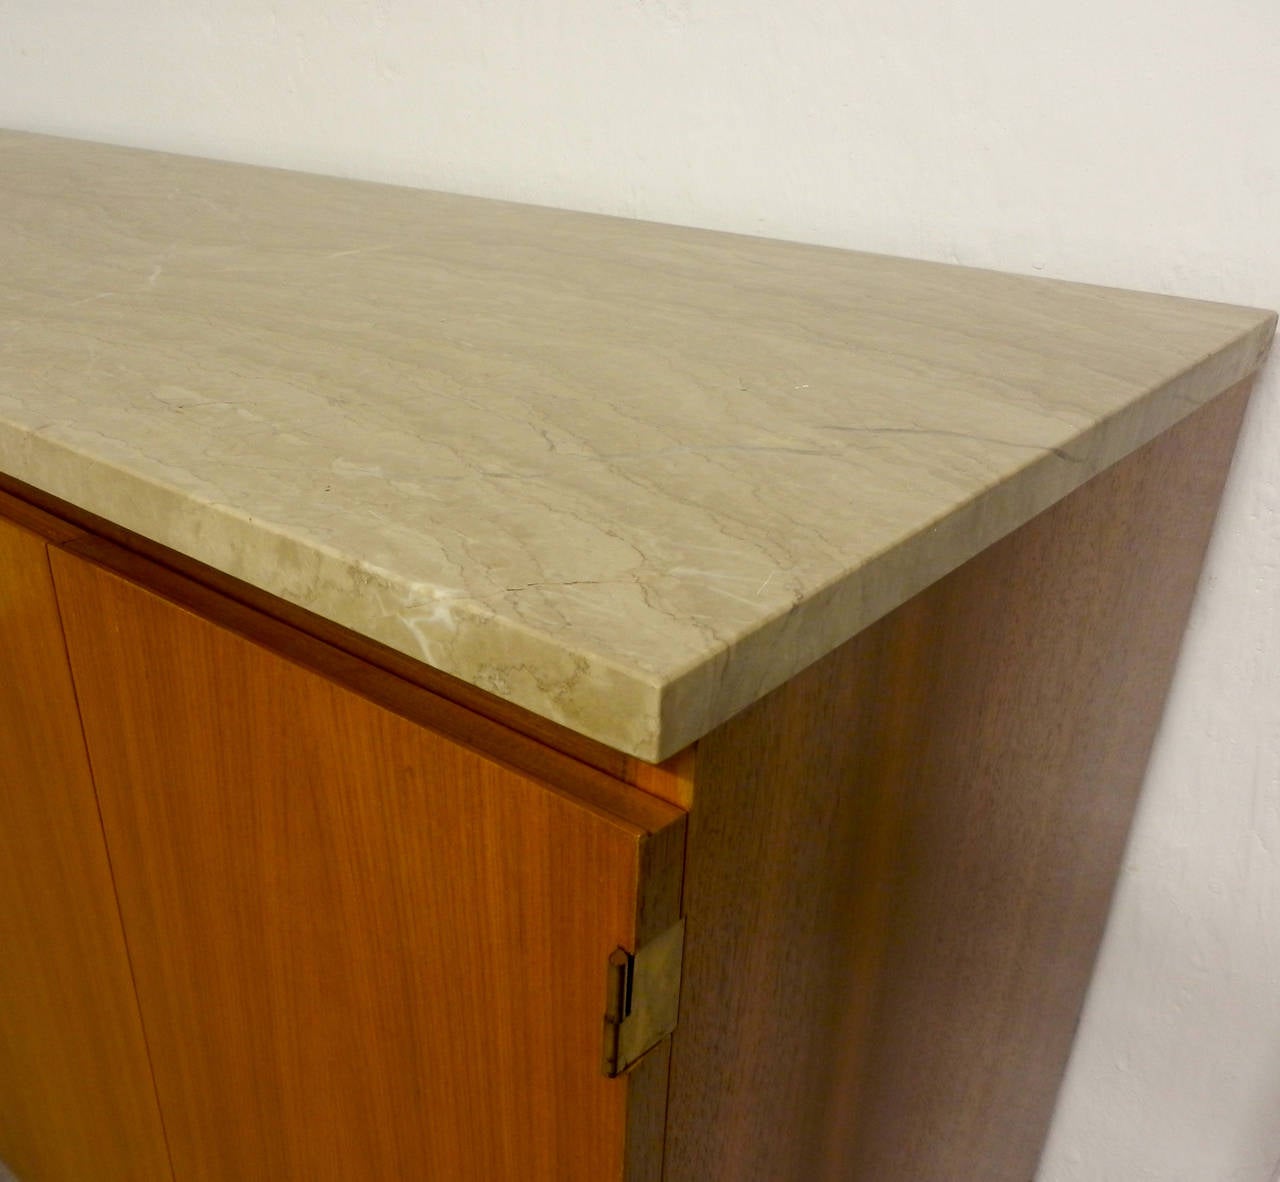 Designed in 1960 and made by wk. Beautiful walnut case and legs. Polished stone top in very good condition.